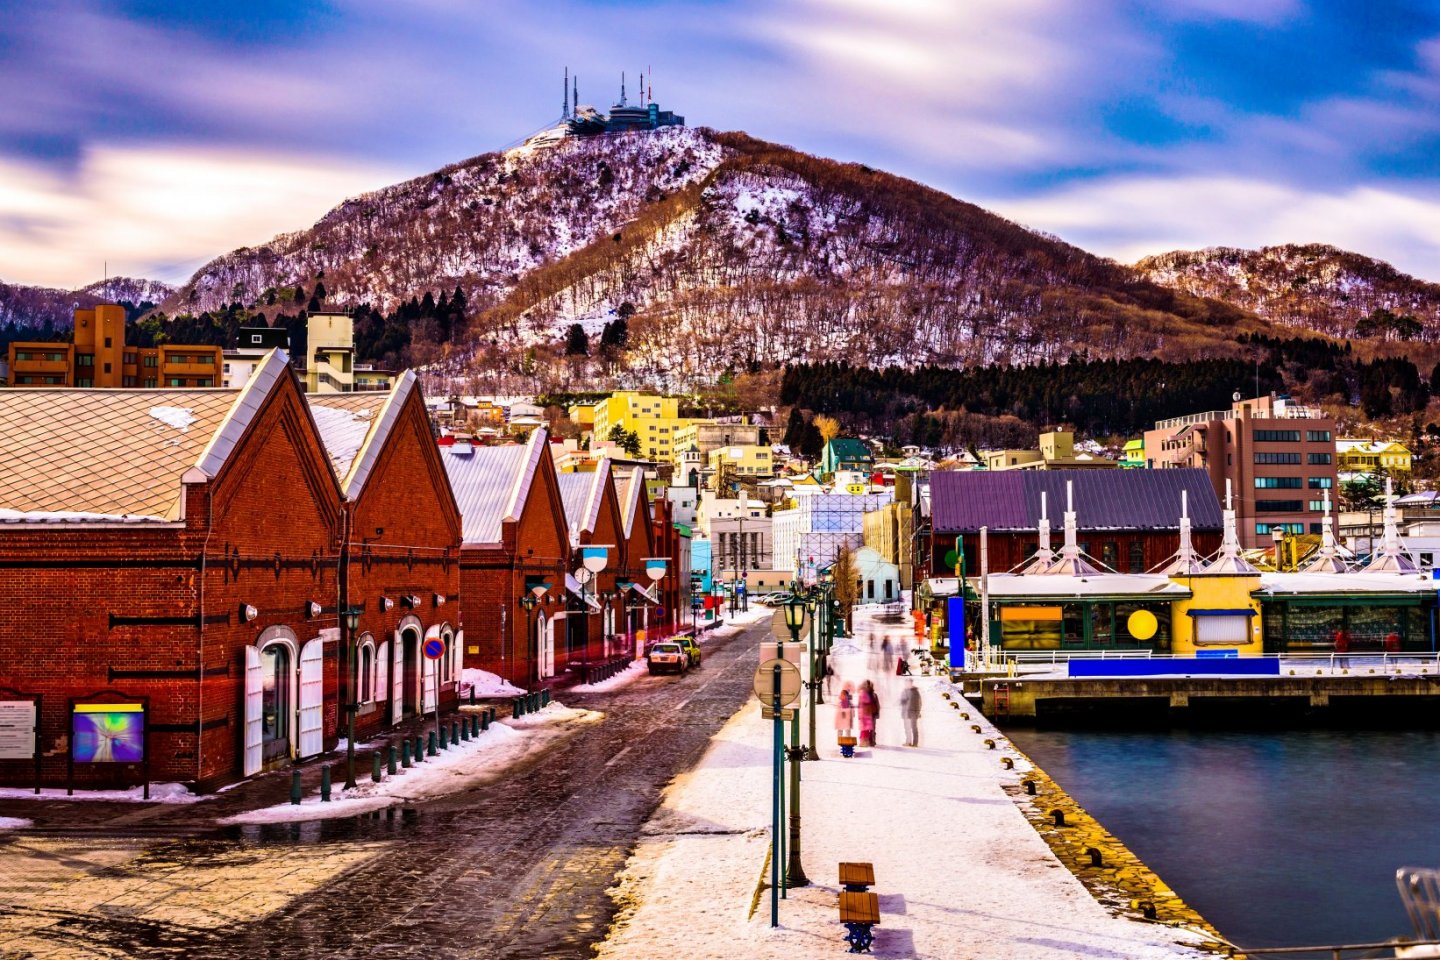 Hakodate is stunning in winter and summer